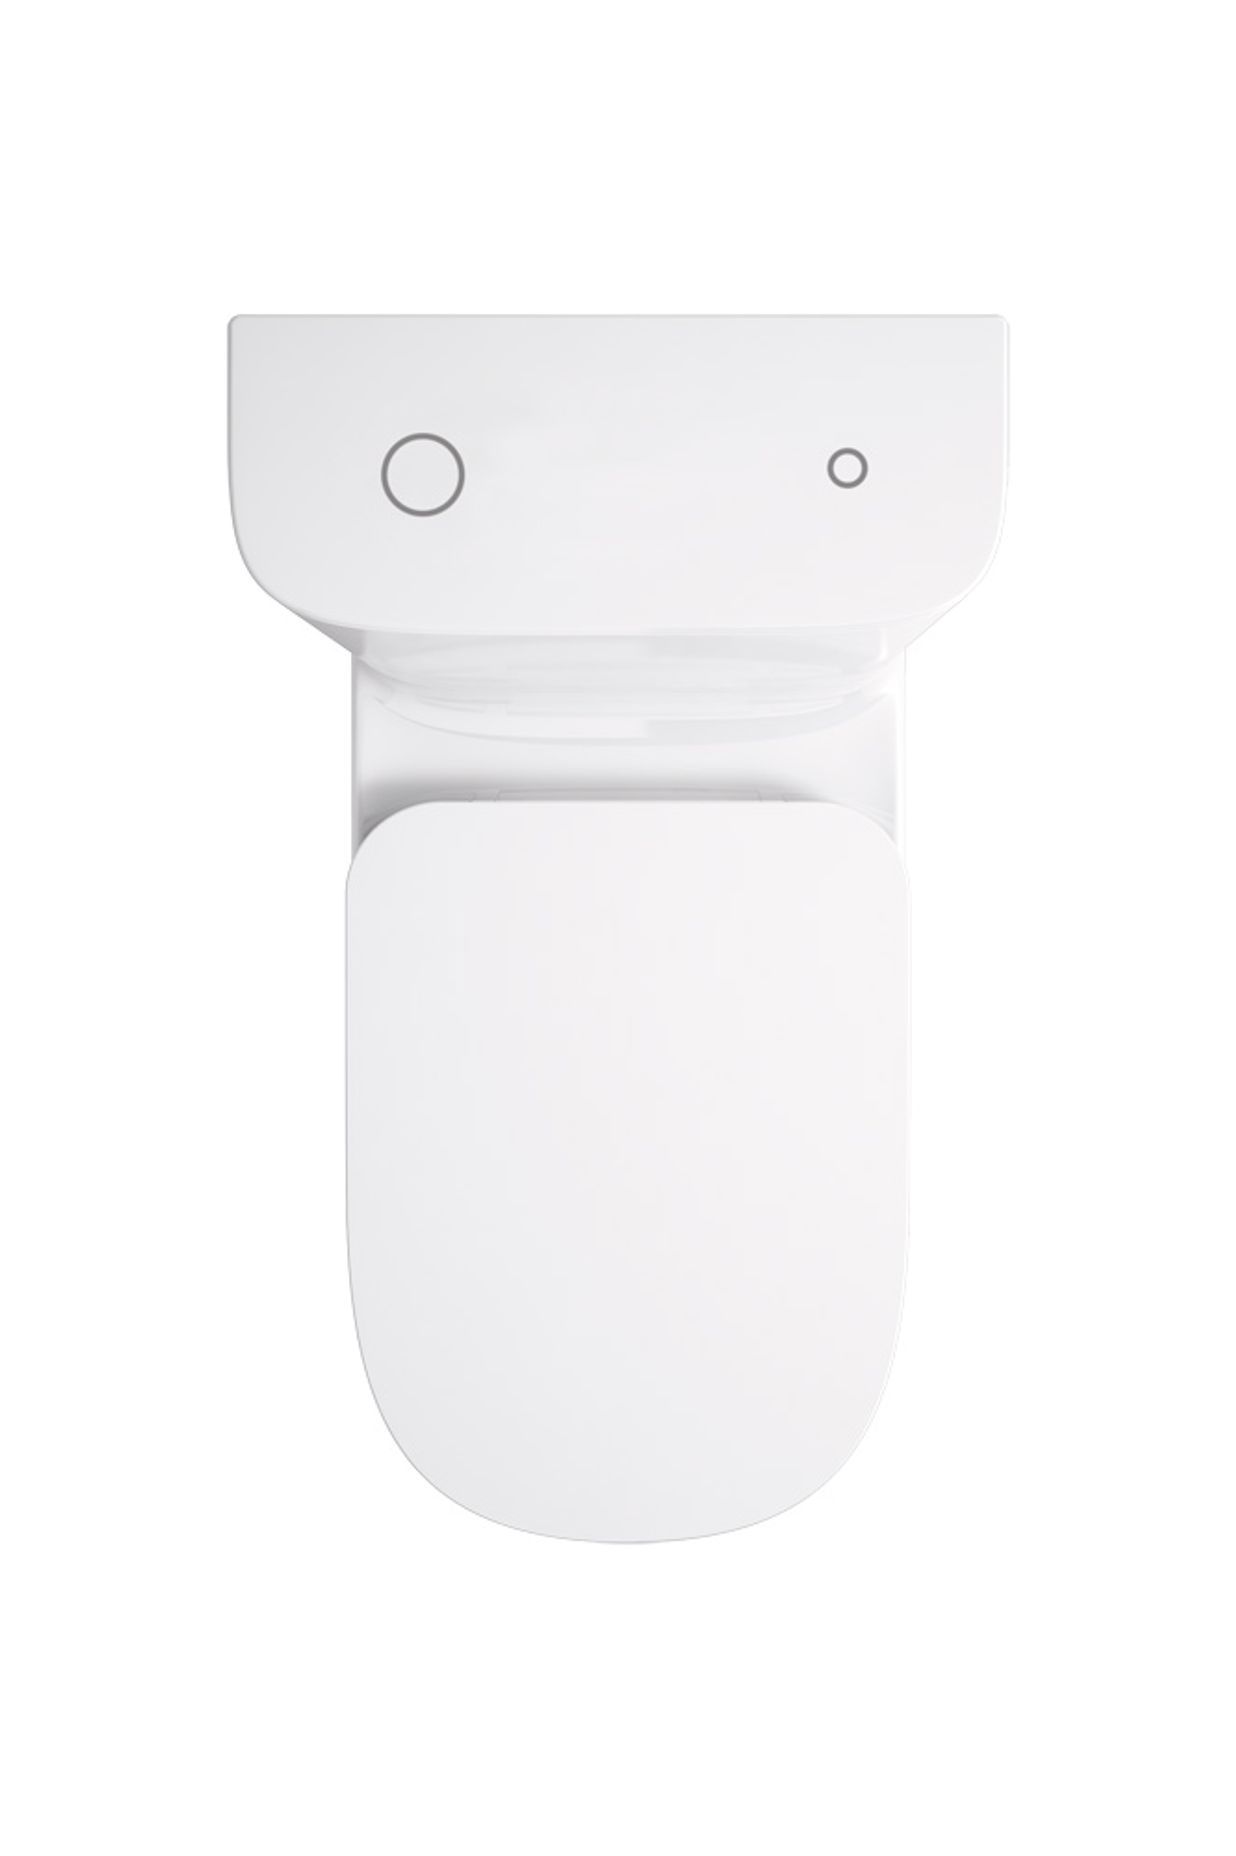 The ModernLife™ Touchless Flush toilet suite is the next generation in hands-free technology.